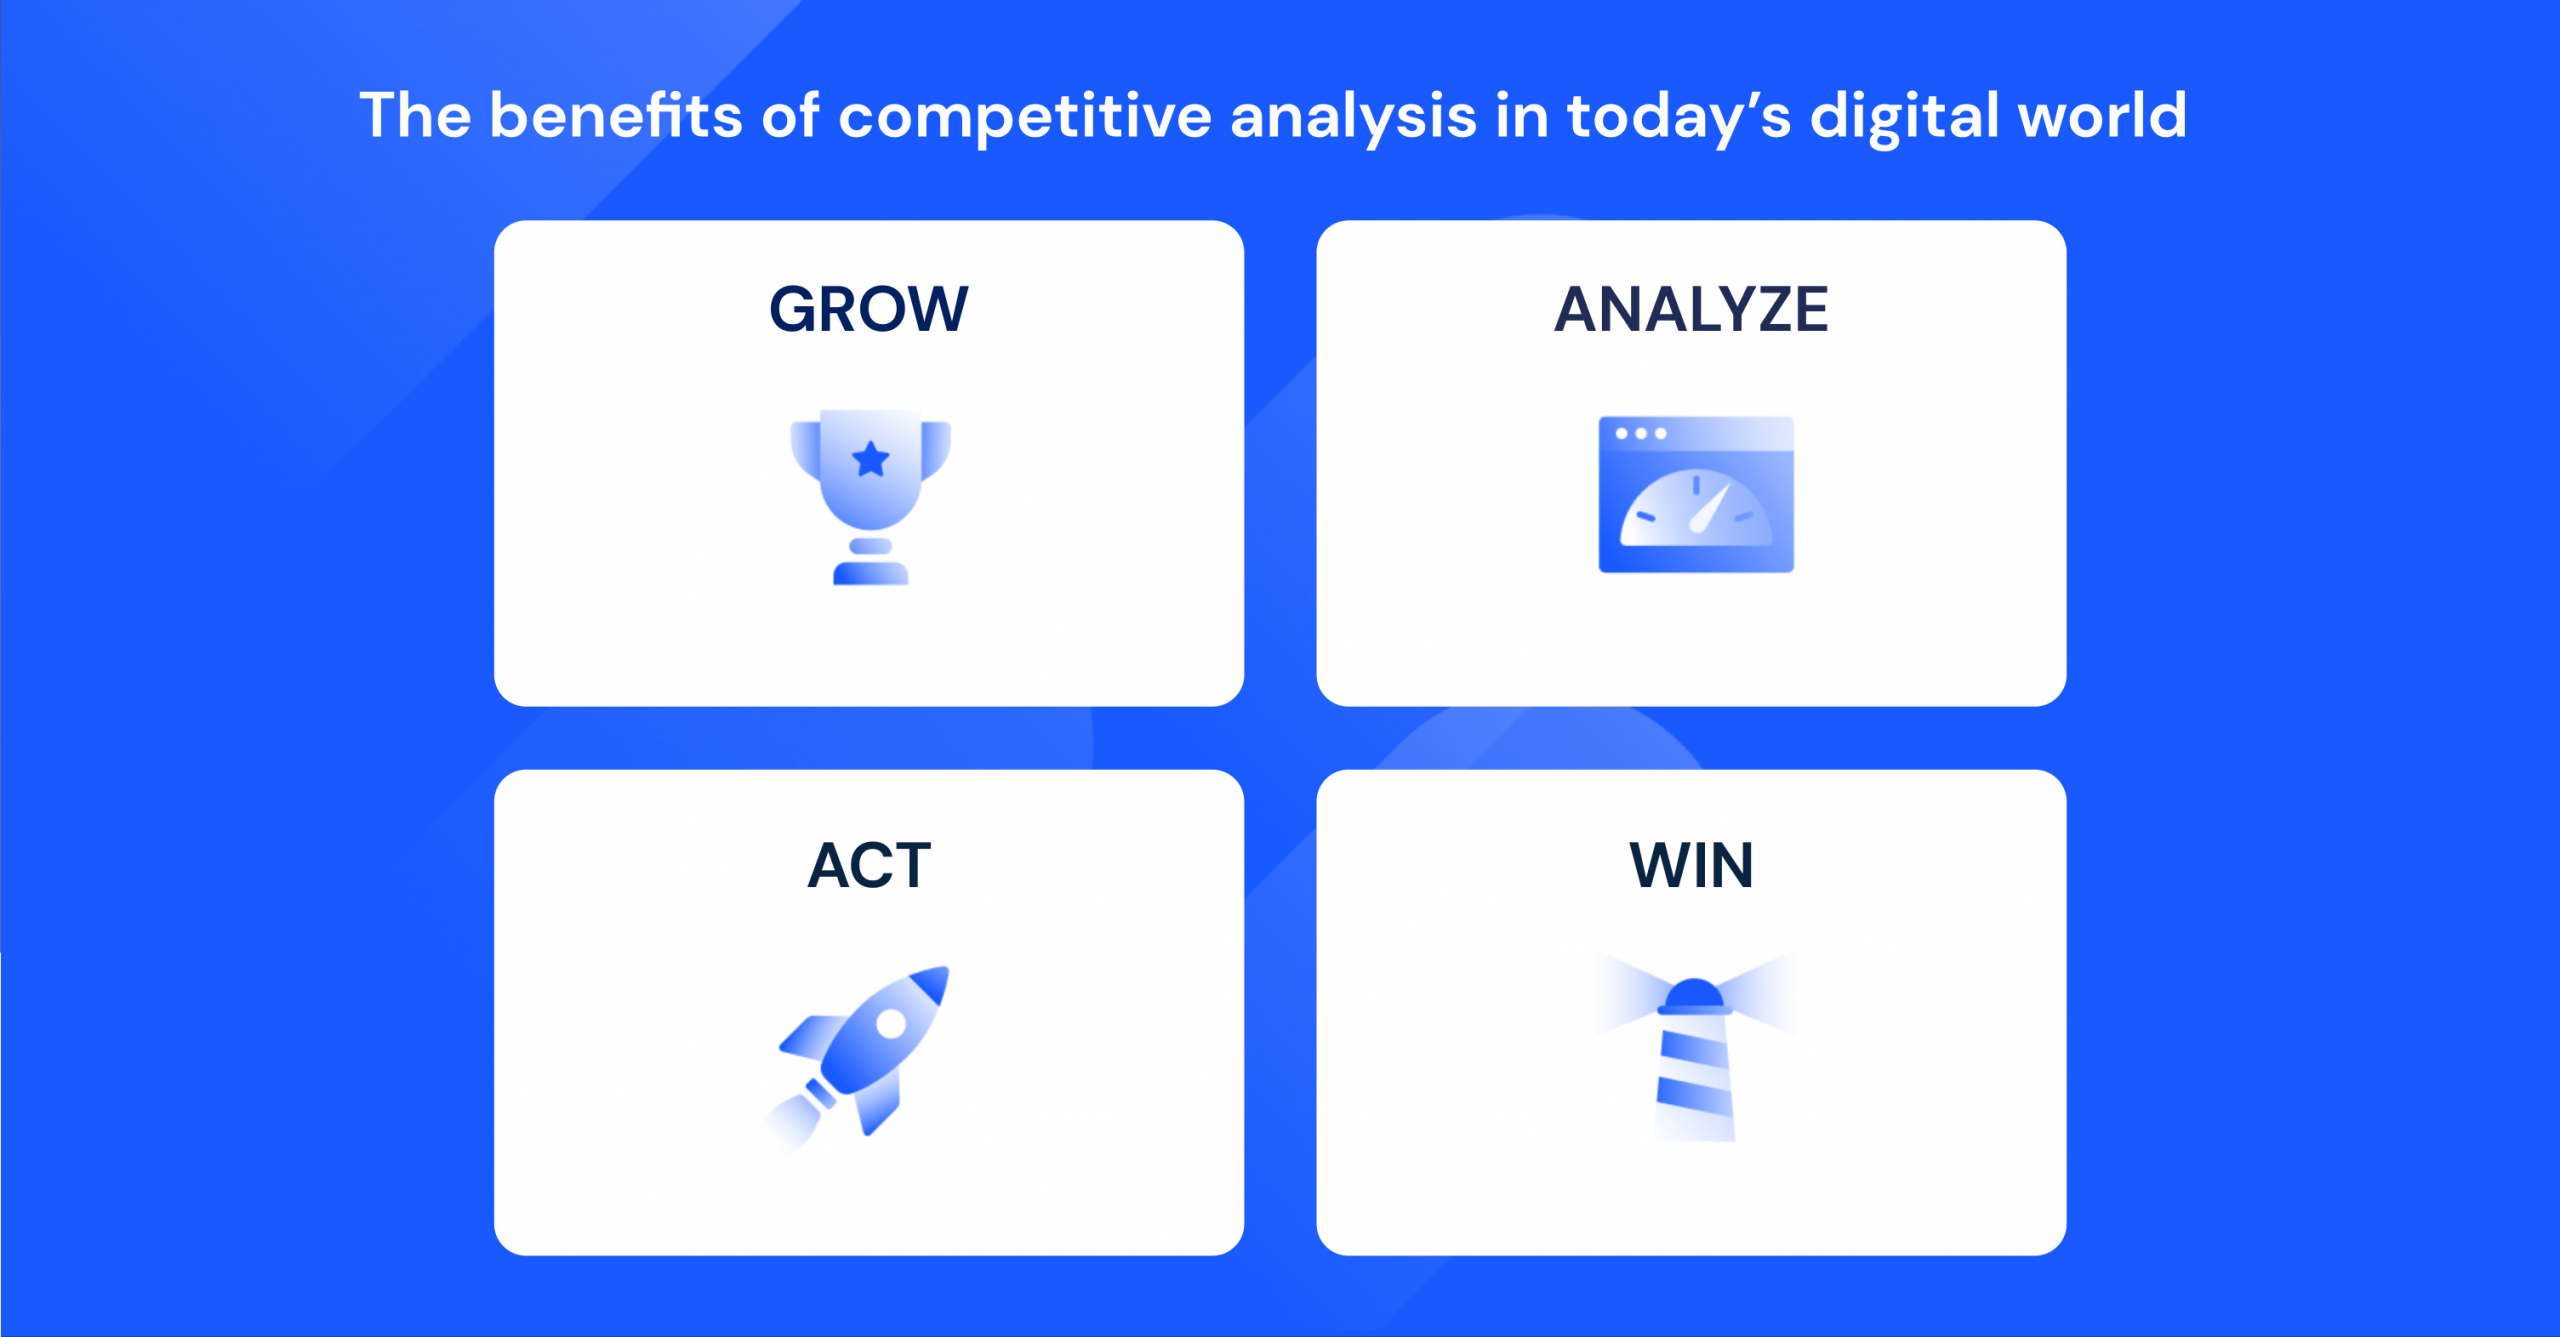 The benefits of competitive analysis in today's digital world